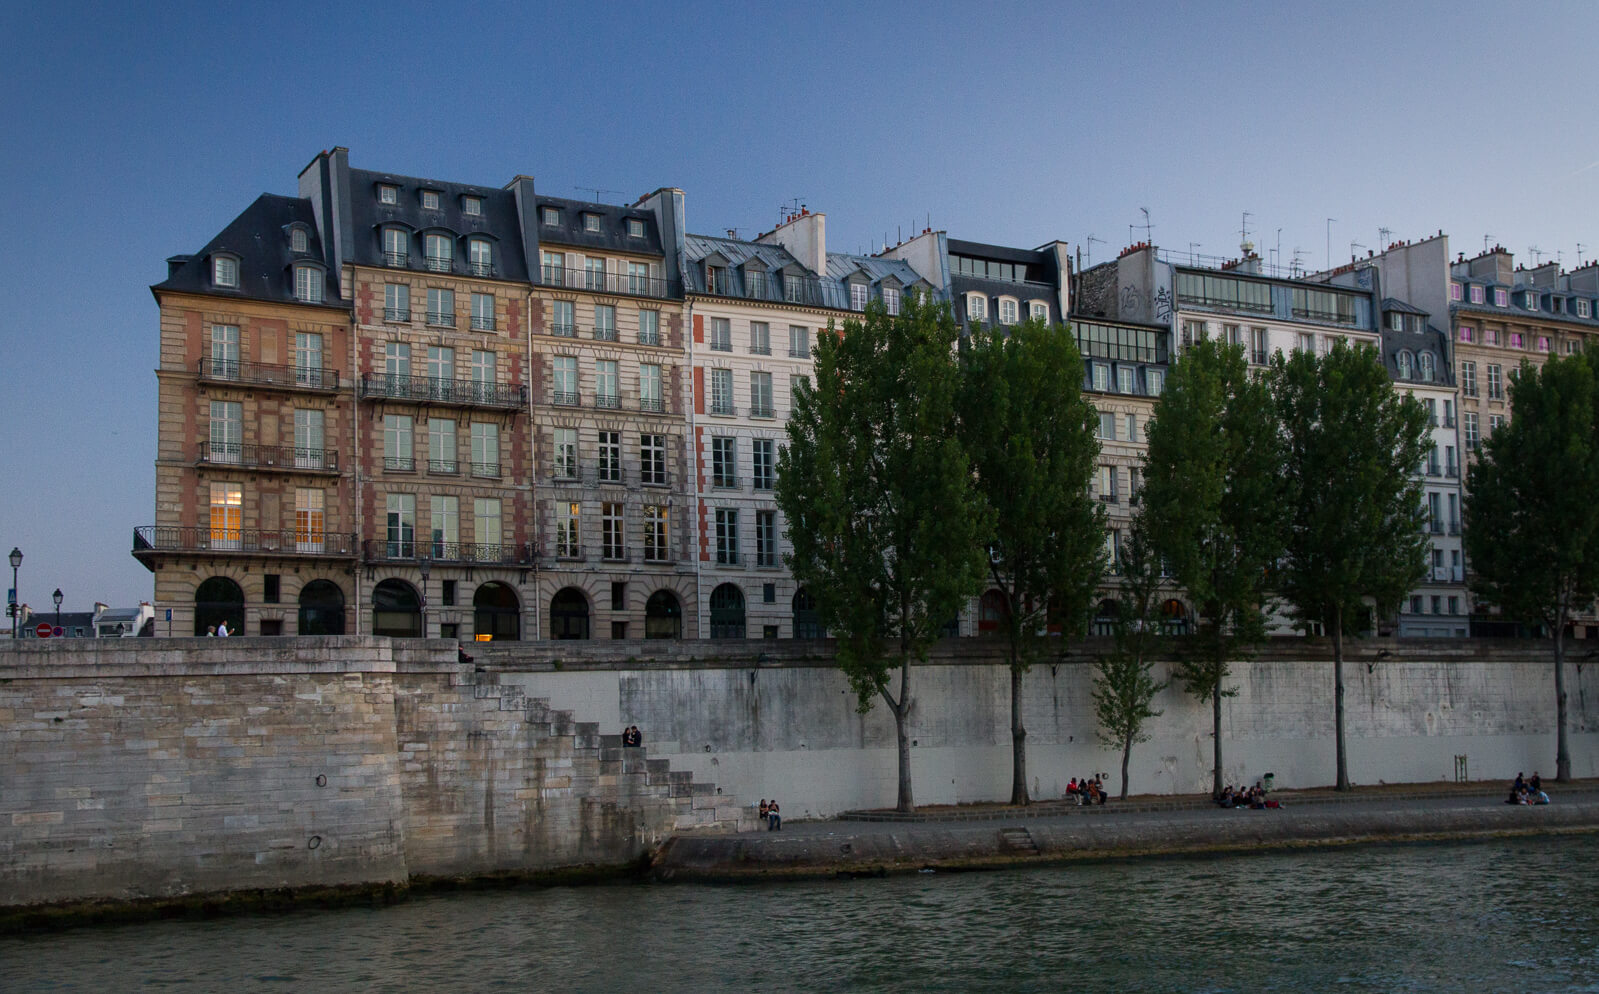 The banks of the Seine in Paris have become much more pleasant for pedestrians since they have been made car-free.